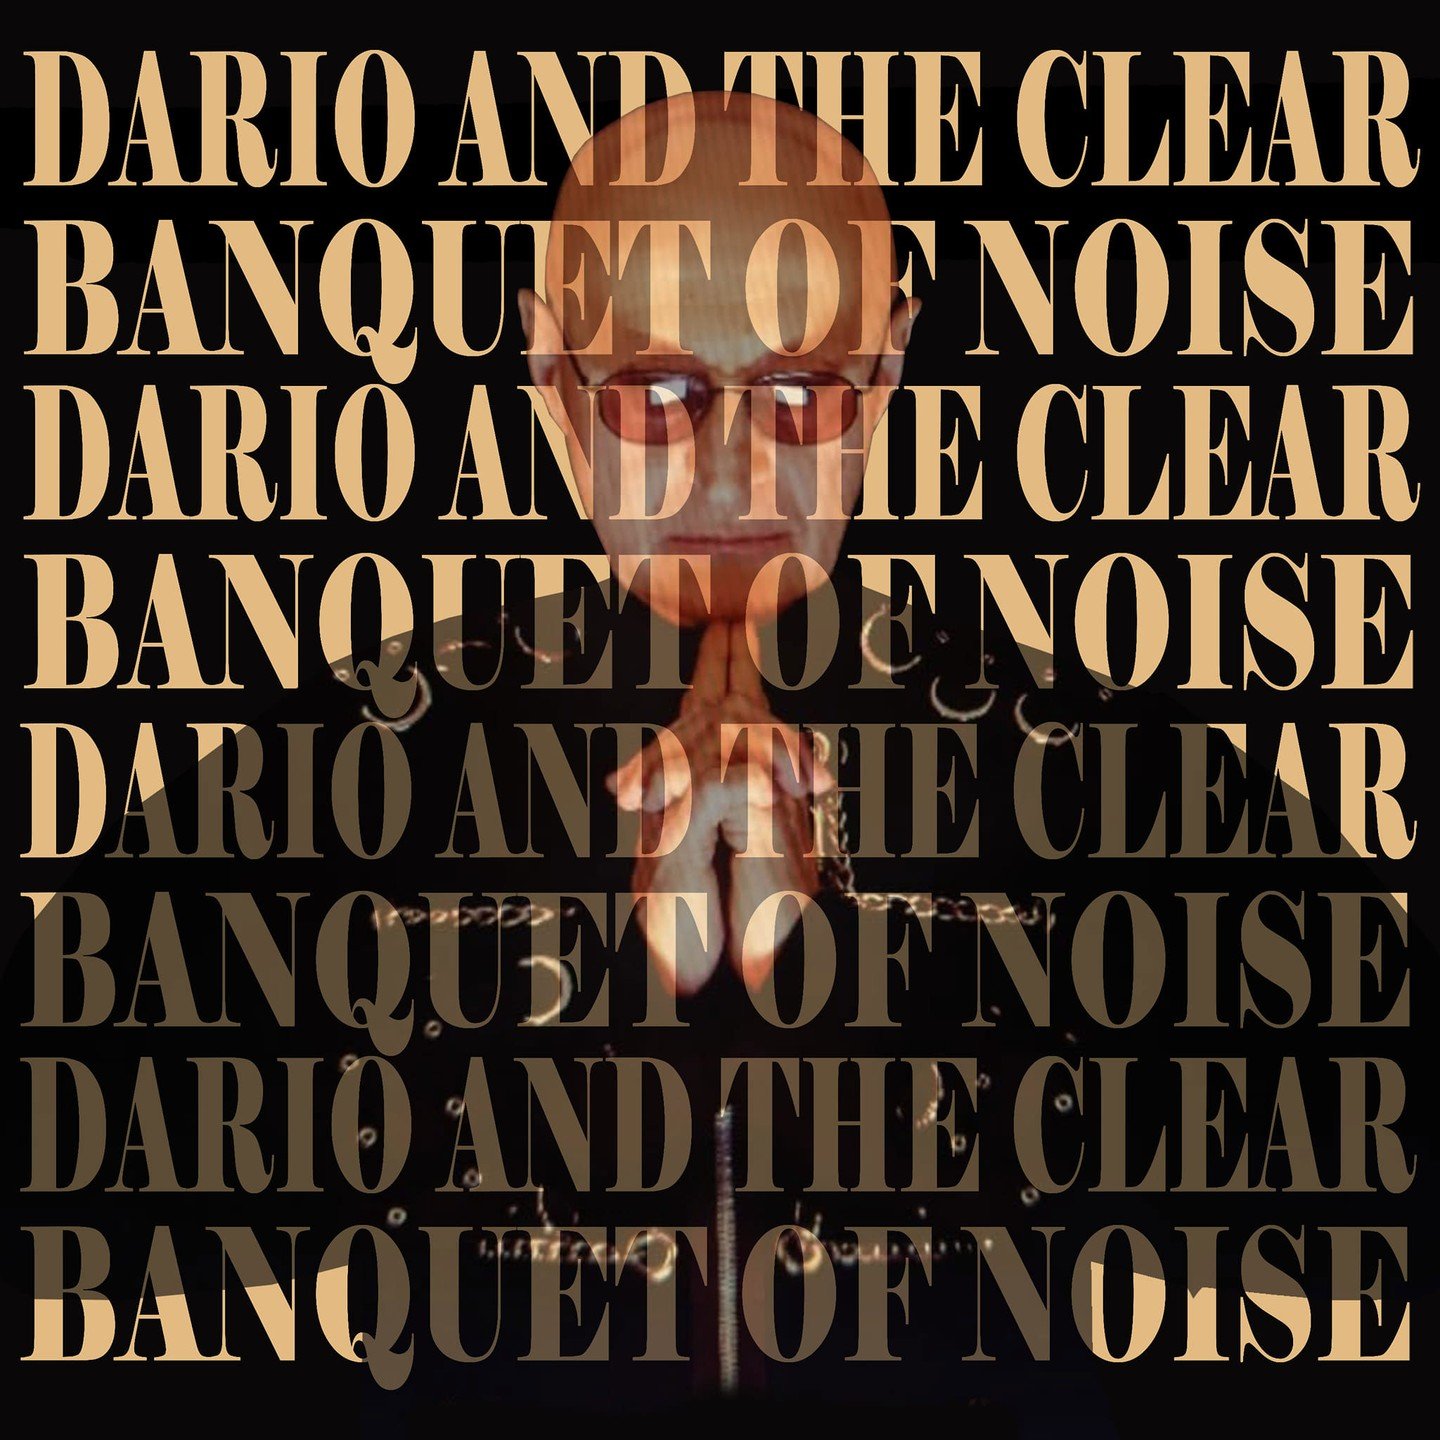 Instead of #musicvideomonday, we're featuring a new album from local actor/musician Dario Saraceno.

The new Dario and the Clear album was officially released April 5 and is available on all streaming platforms and on Bandcamp at www.darioandtheclear